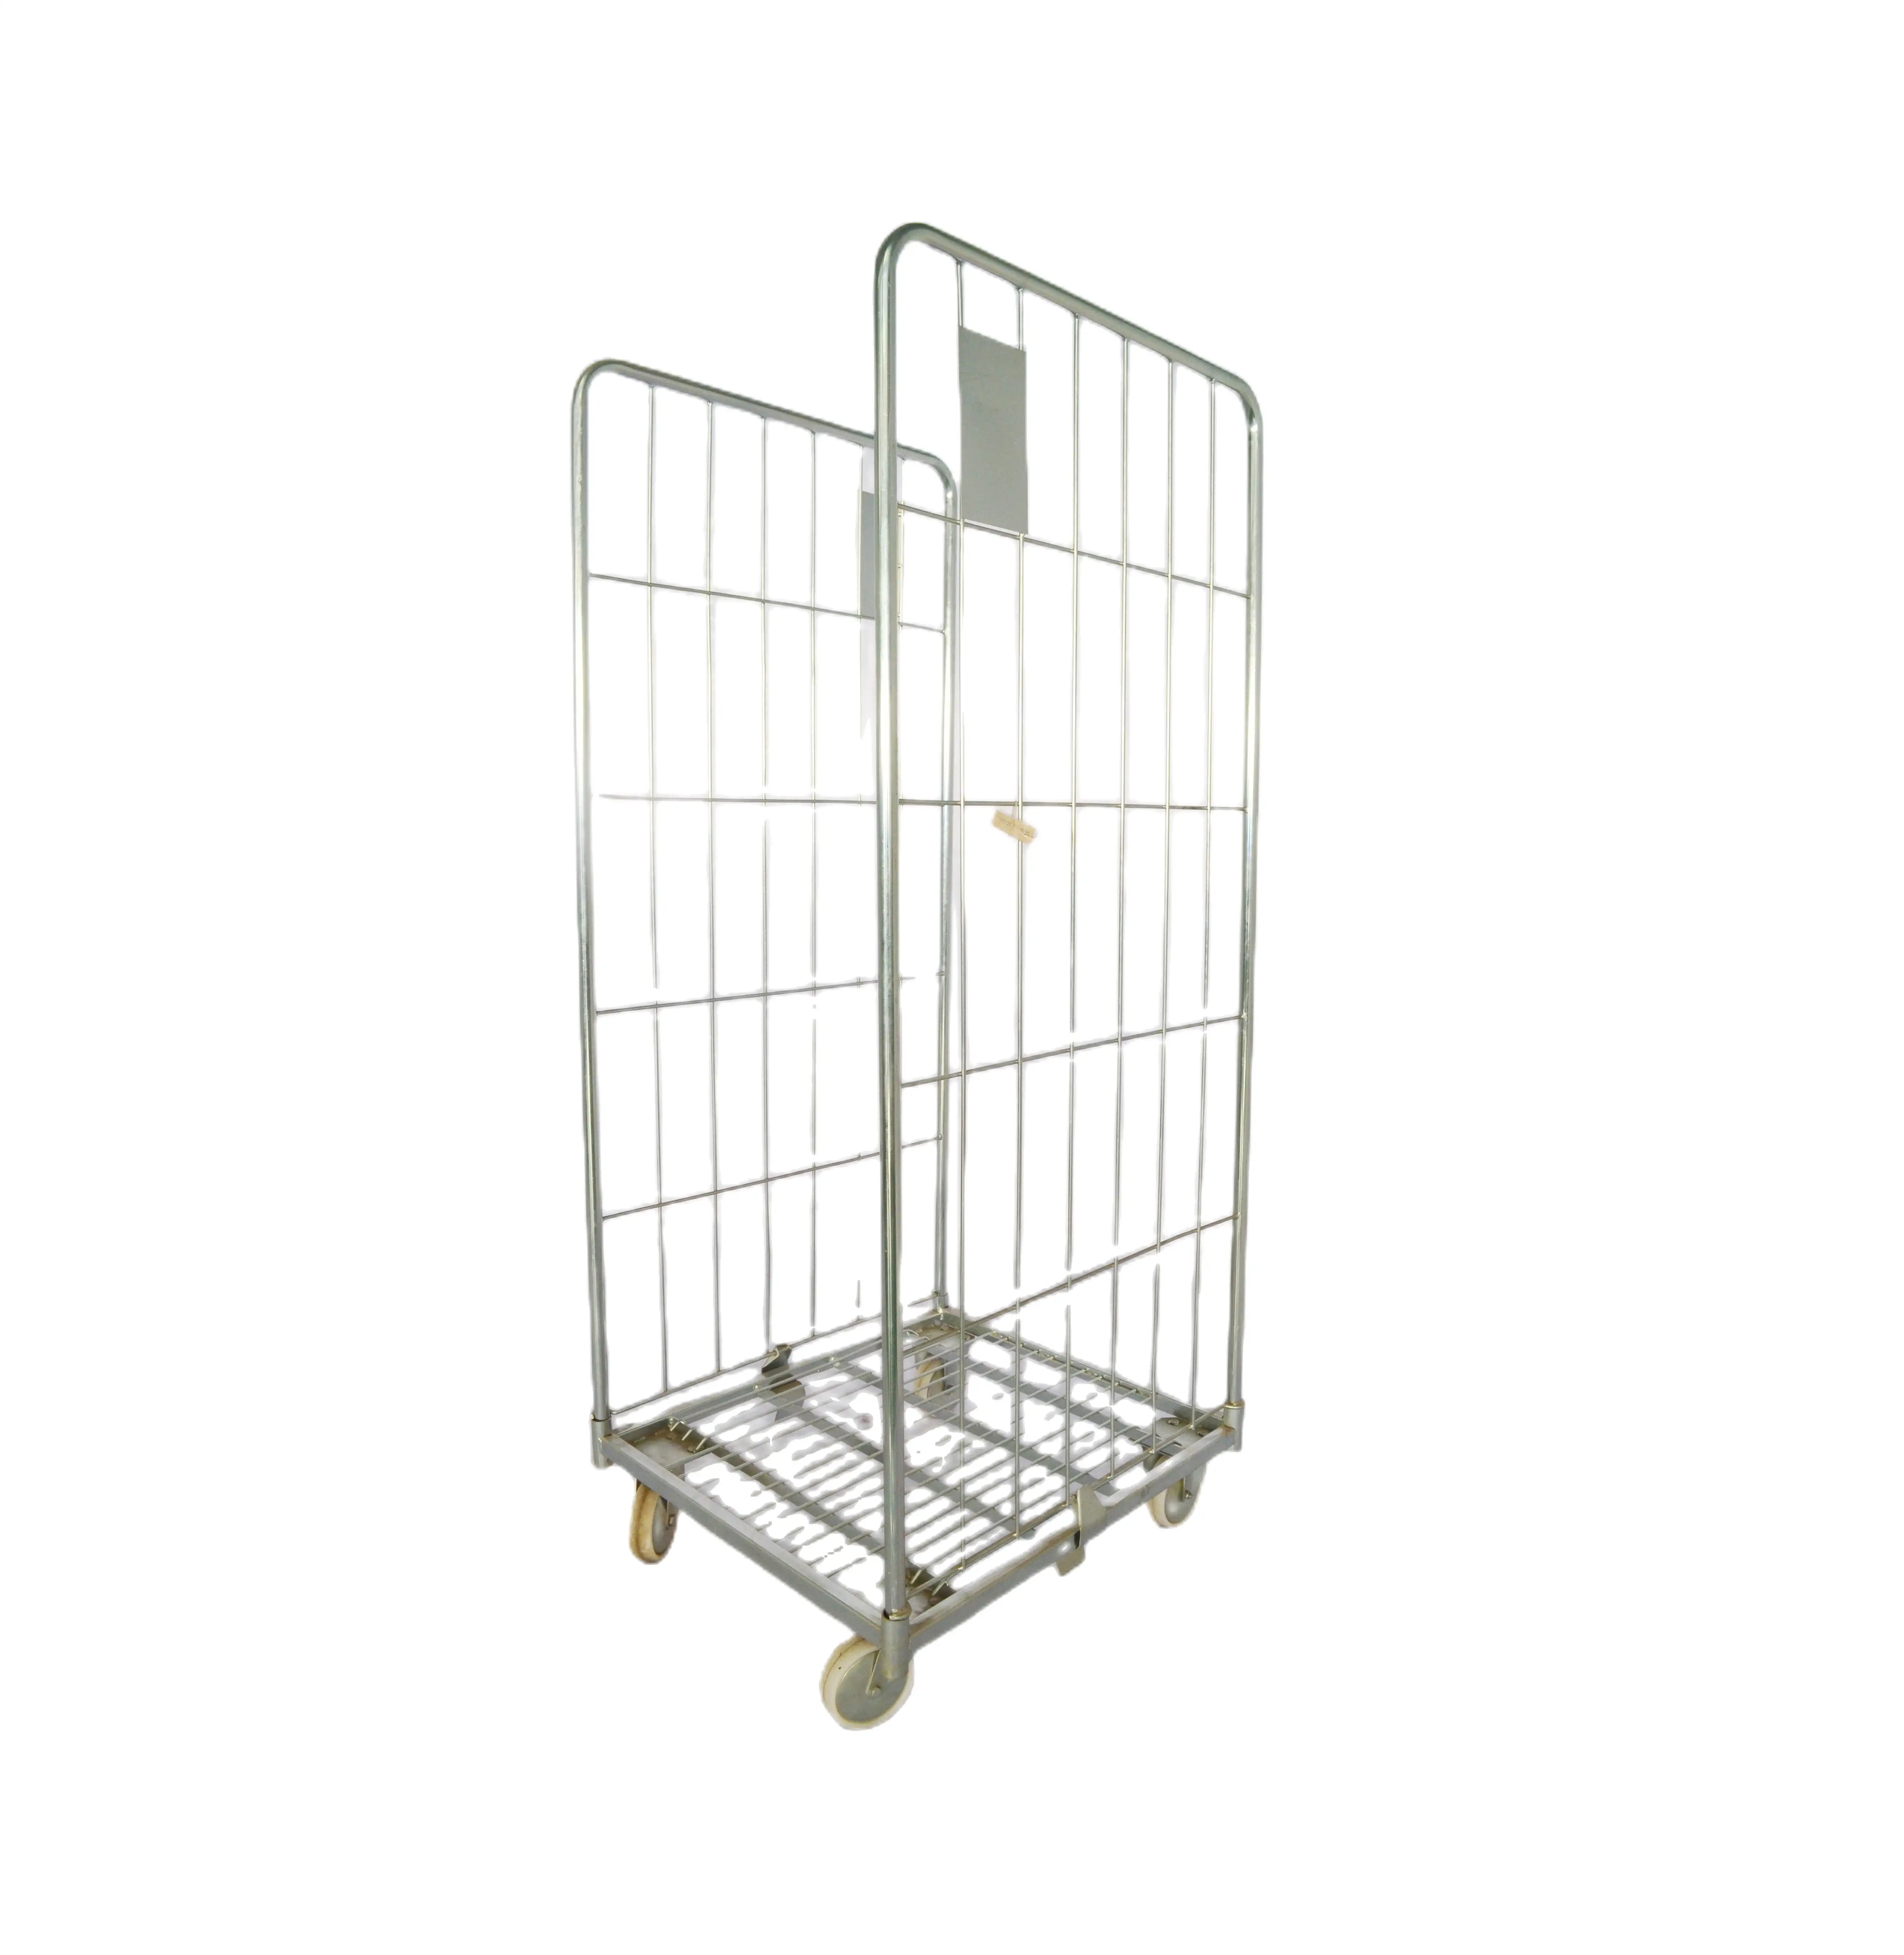 BHK96 Hot Selling Mini Industrial Side Cage Roll Cart 4 With Low Price